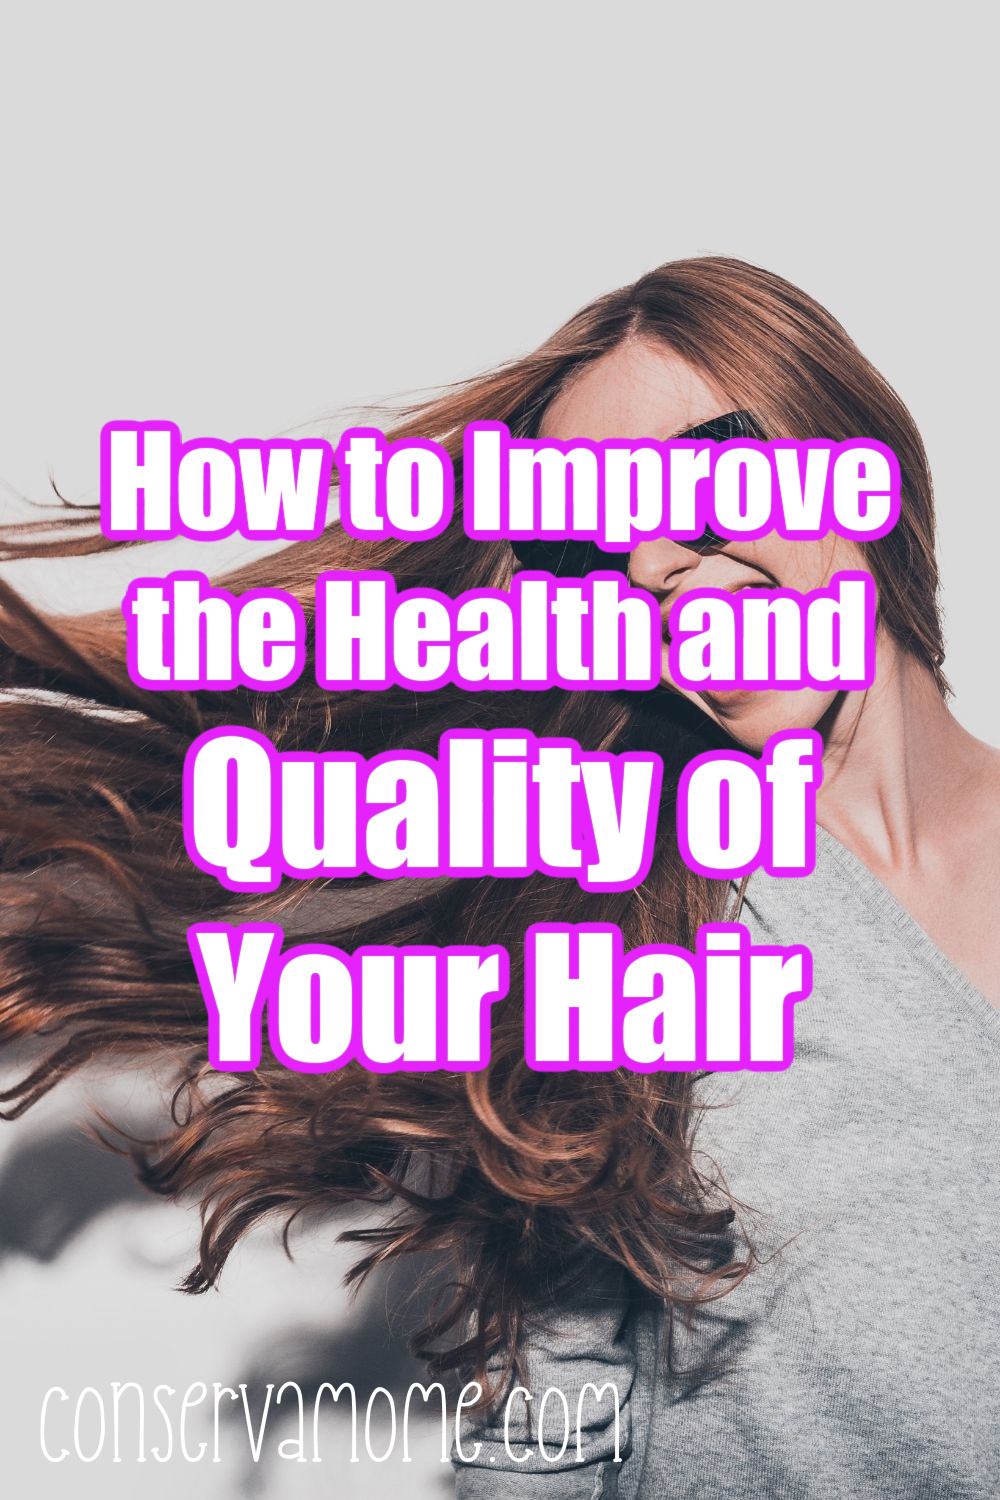 How to Improve the Health and Quality of Your Hair